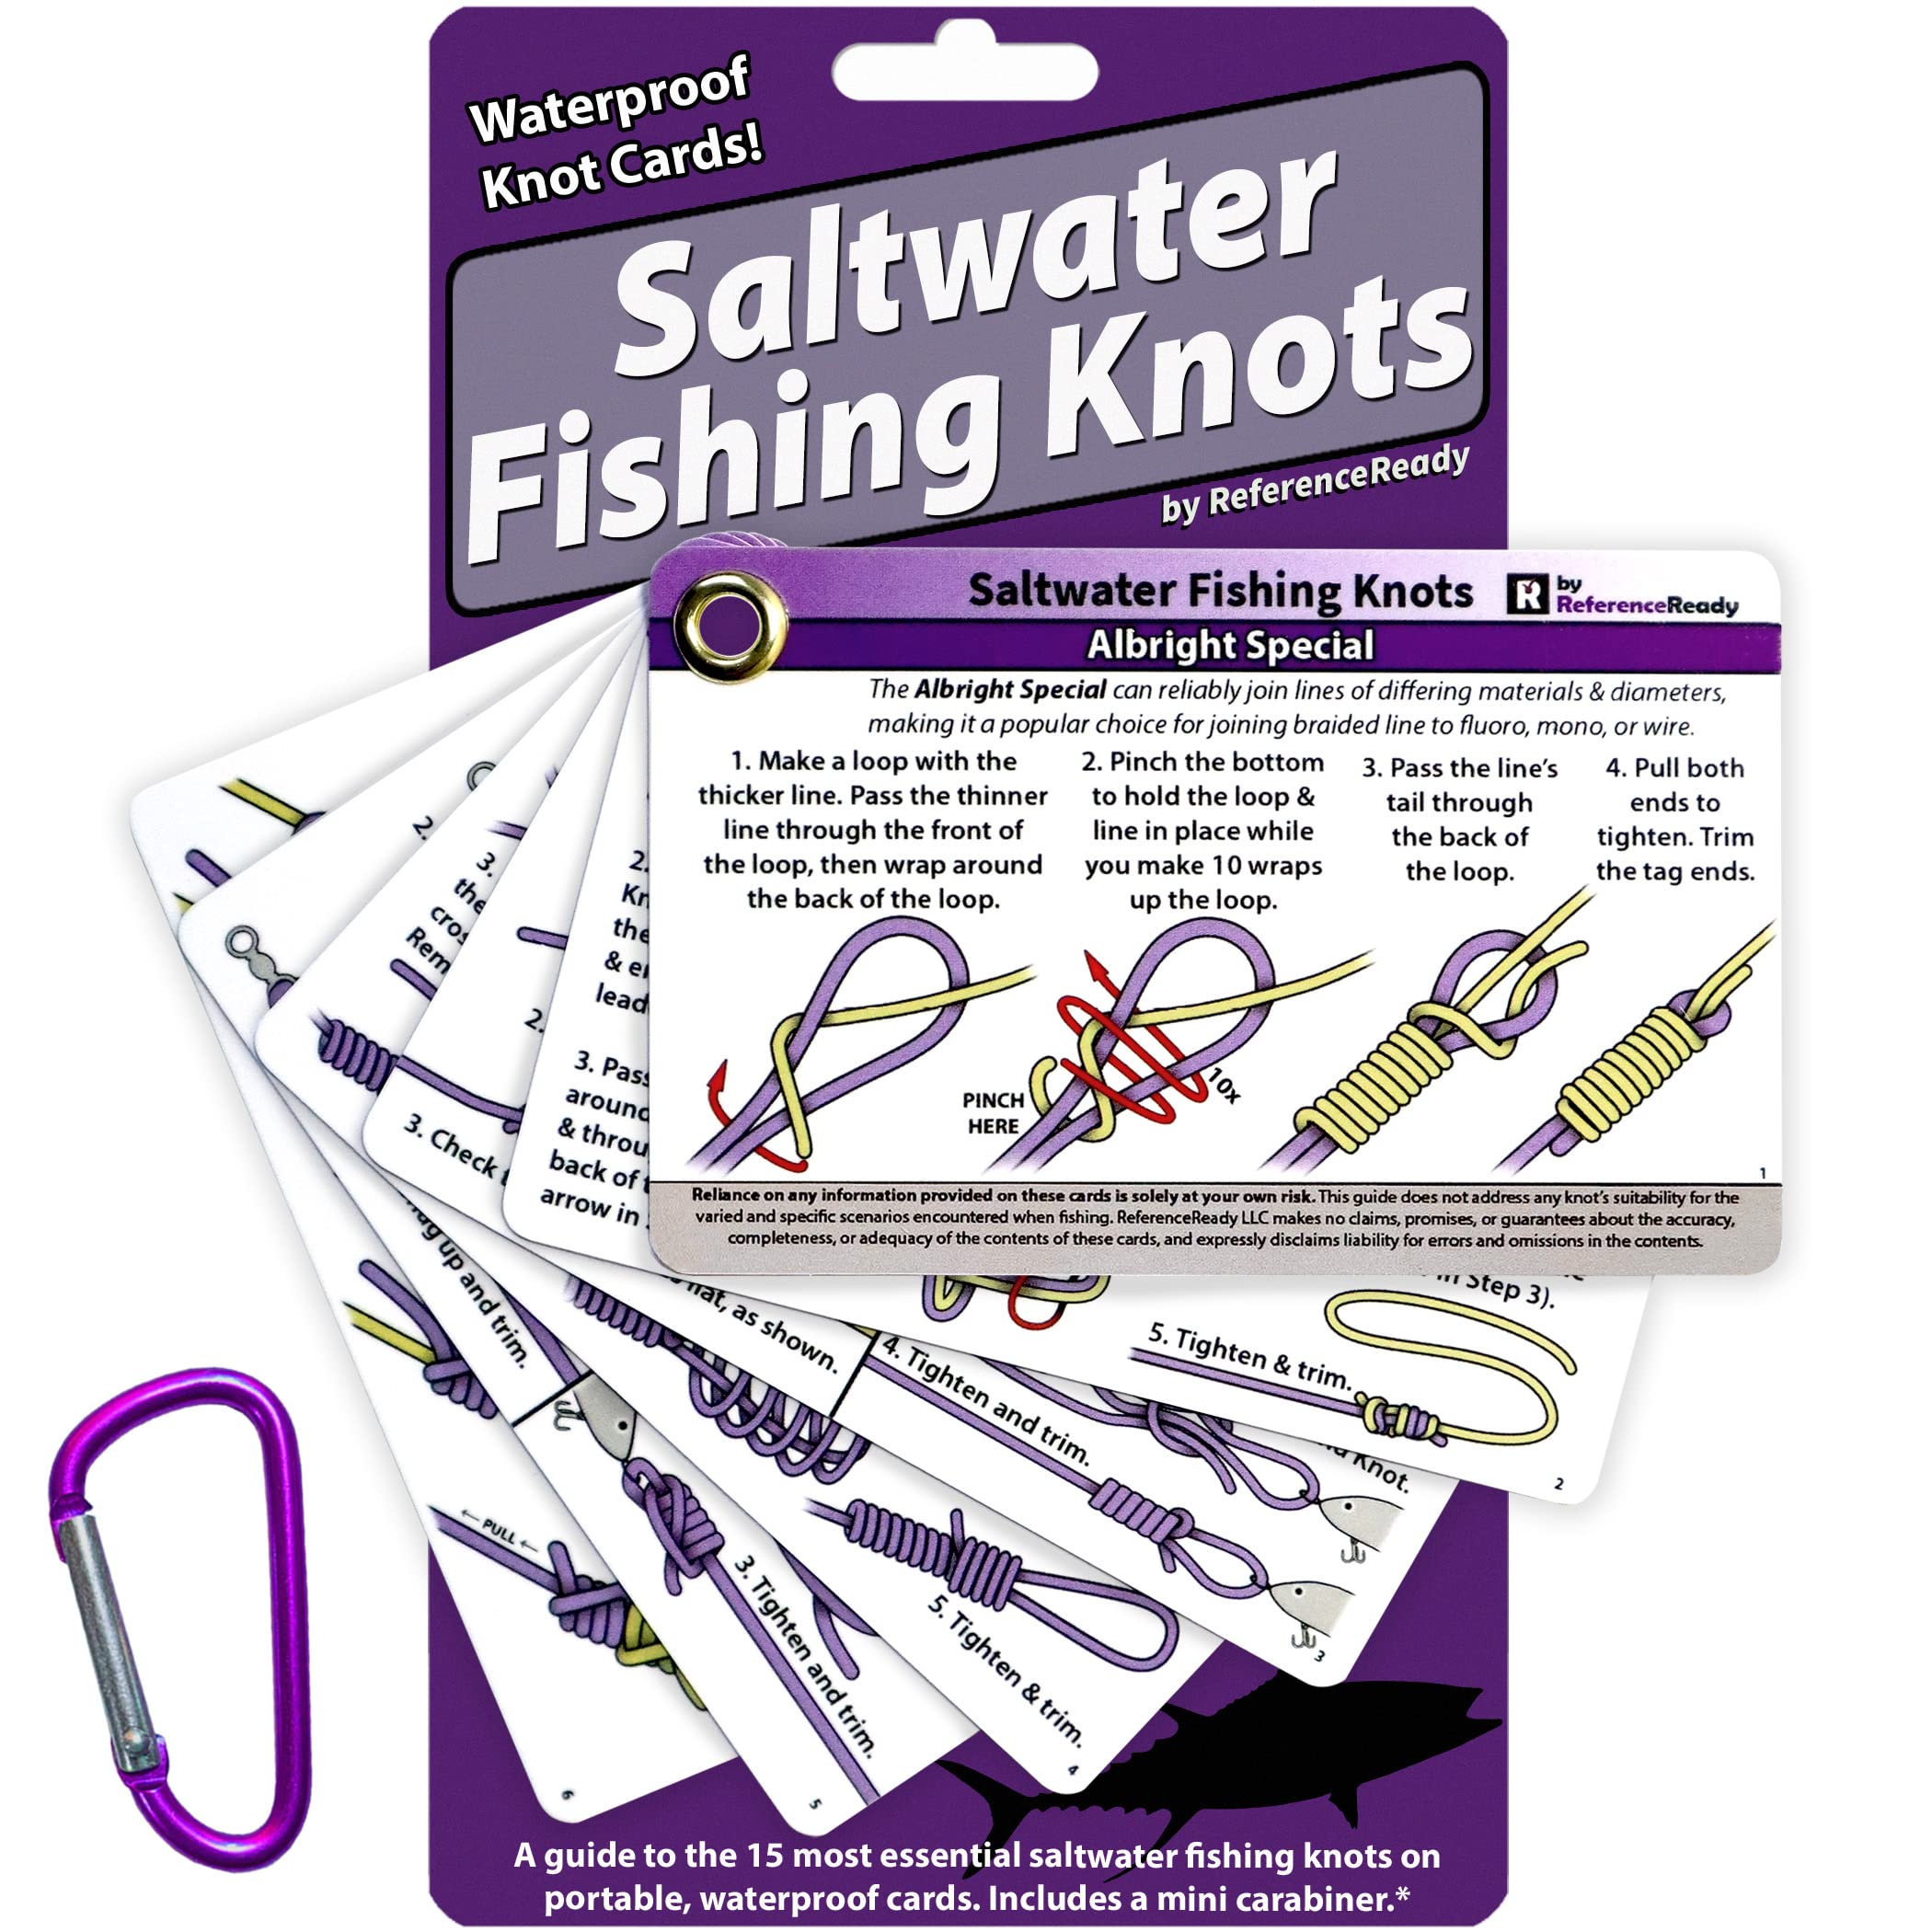 These and more fishing knots are available on waterproof plastic